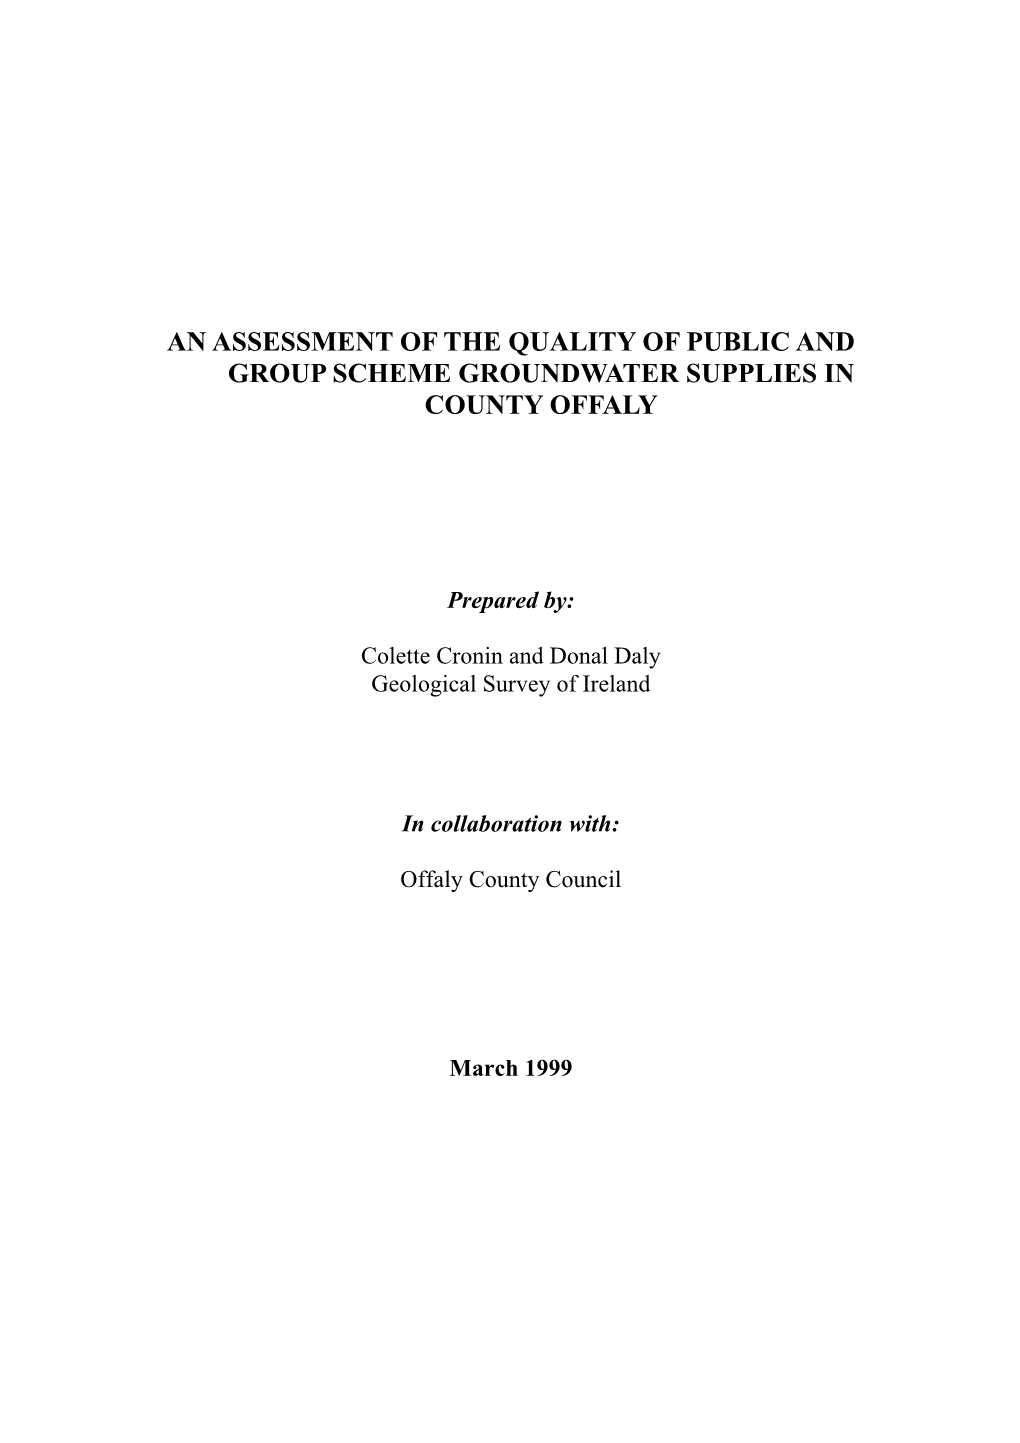 An Assessment of the Quality of Public and Group Scheme Groundwater Supplies in County Offaly